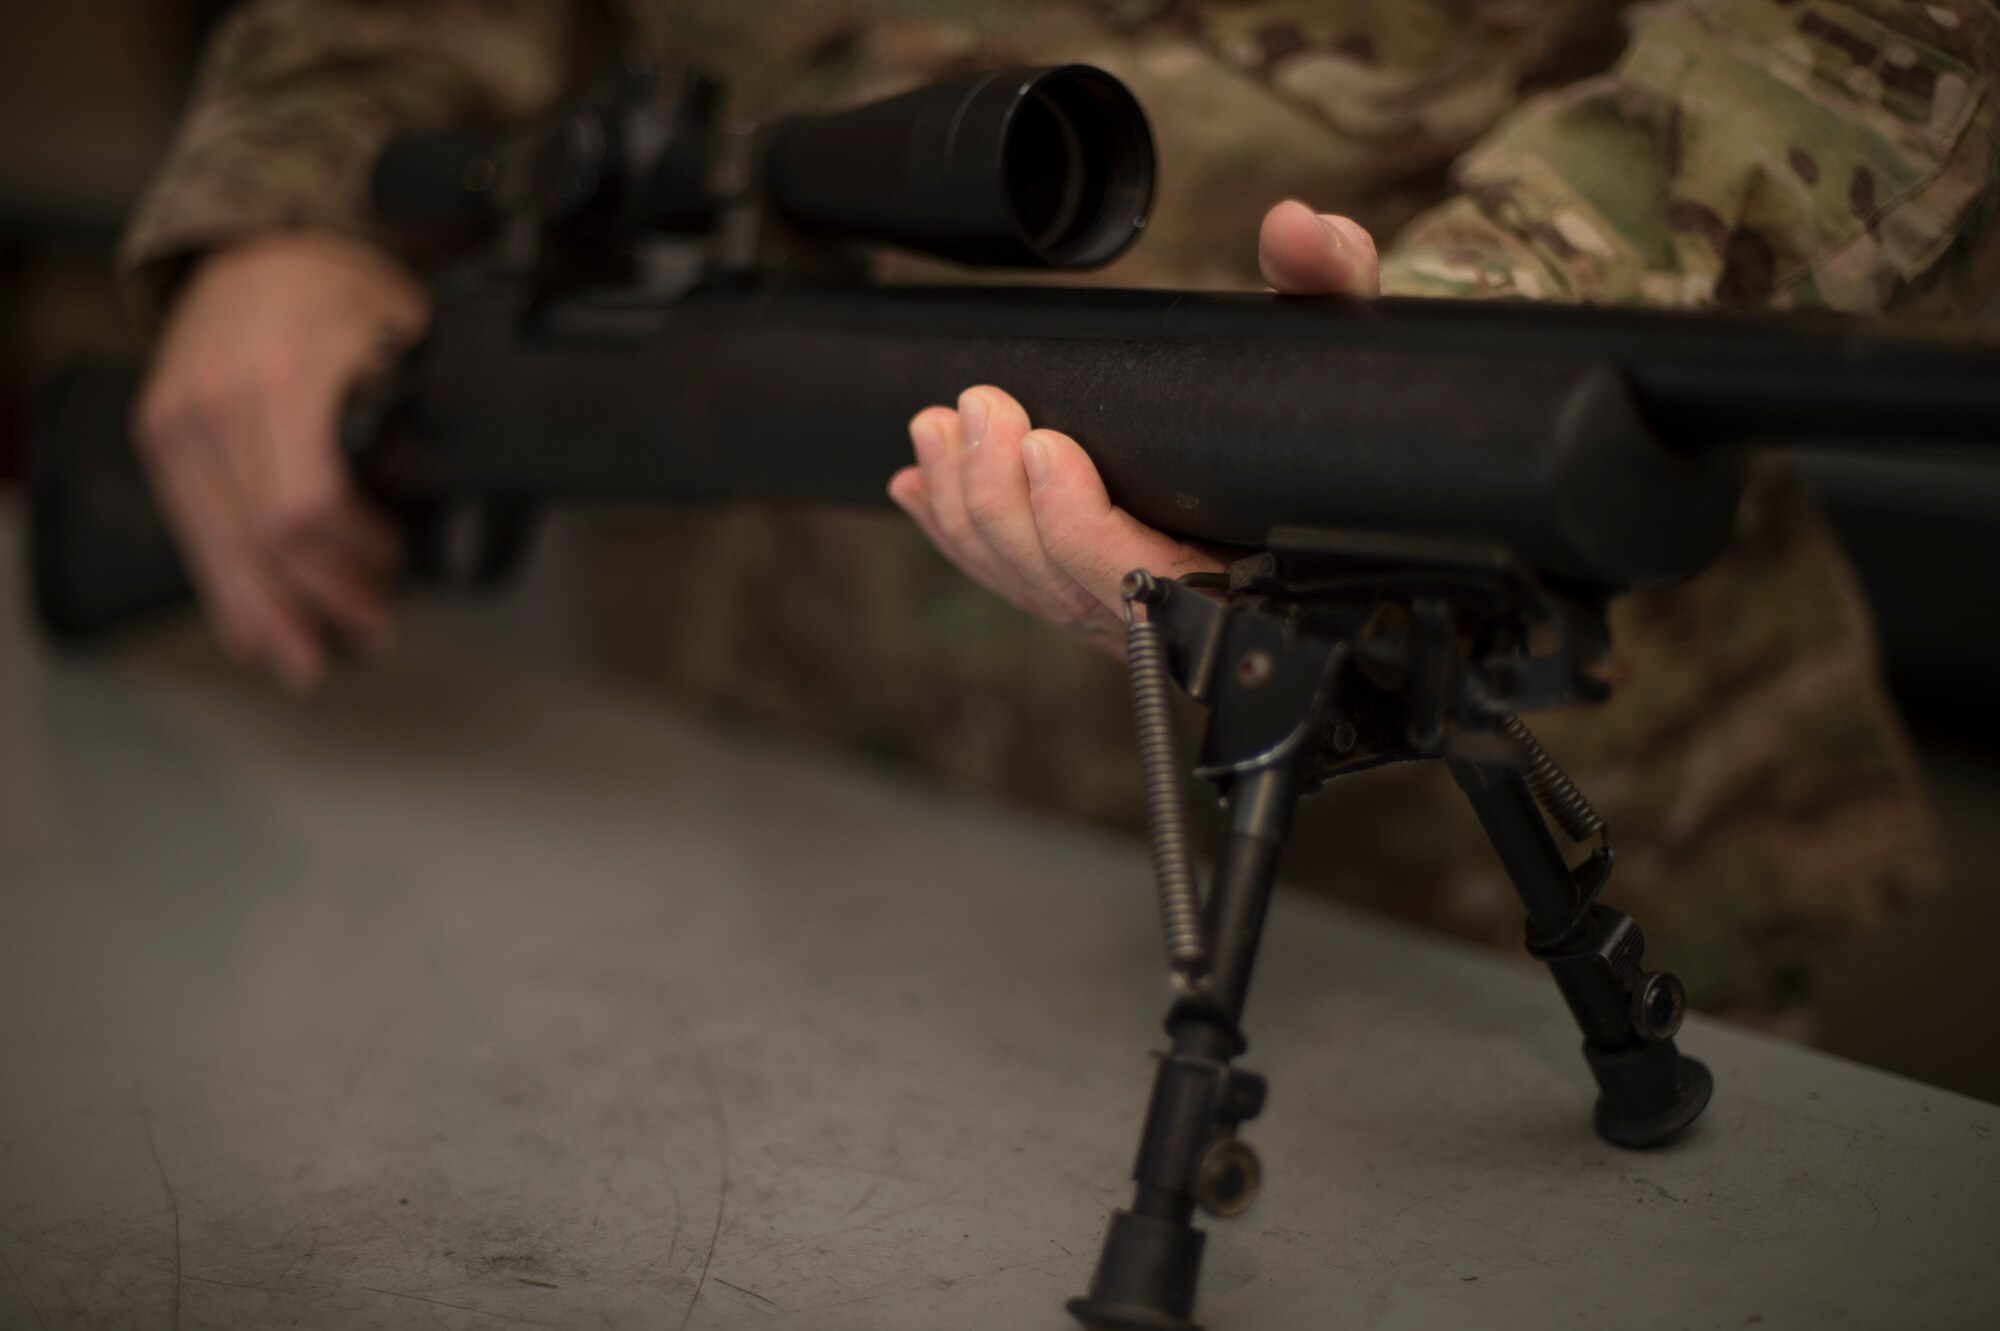 012- U.S. Air Force Staff Sgt. Joseph Crotty, 822d Base Defense Squadron NCO in charge of standards and evaluations, examines a M24 Sniper Weapon System July 2, 2015, at Moody Air Force Base, Ga. Crotty was one of two Airmen who were selected to attend the Royal Air Force’s Basic Sniper Course. (U.S. Air Force photo by Staff Sgt. Eric Summers Jr./Released)